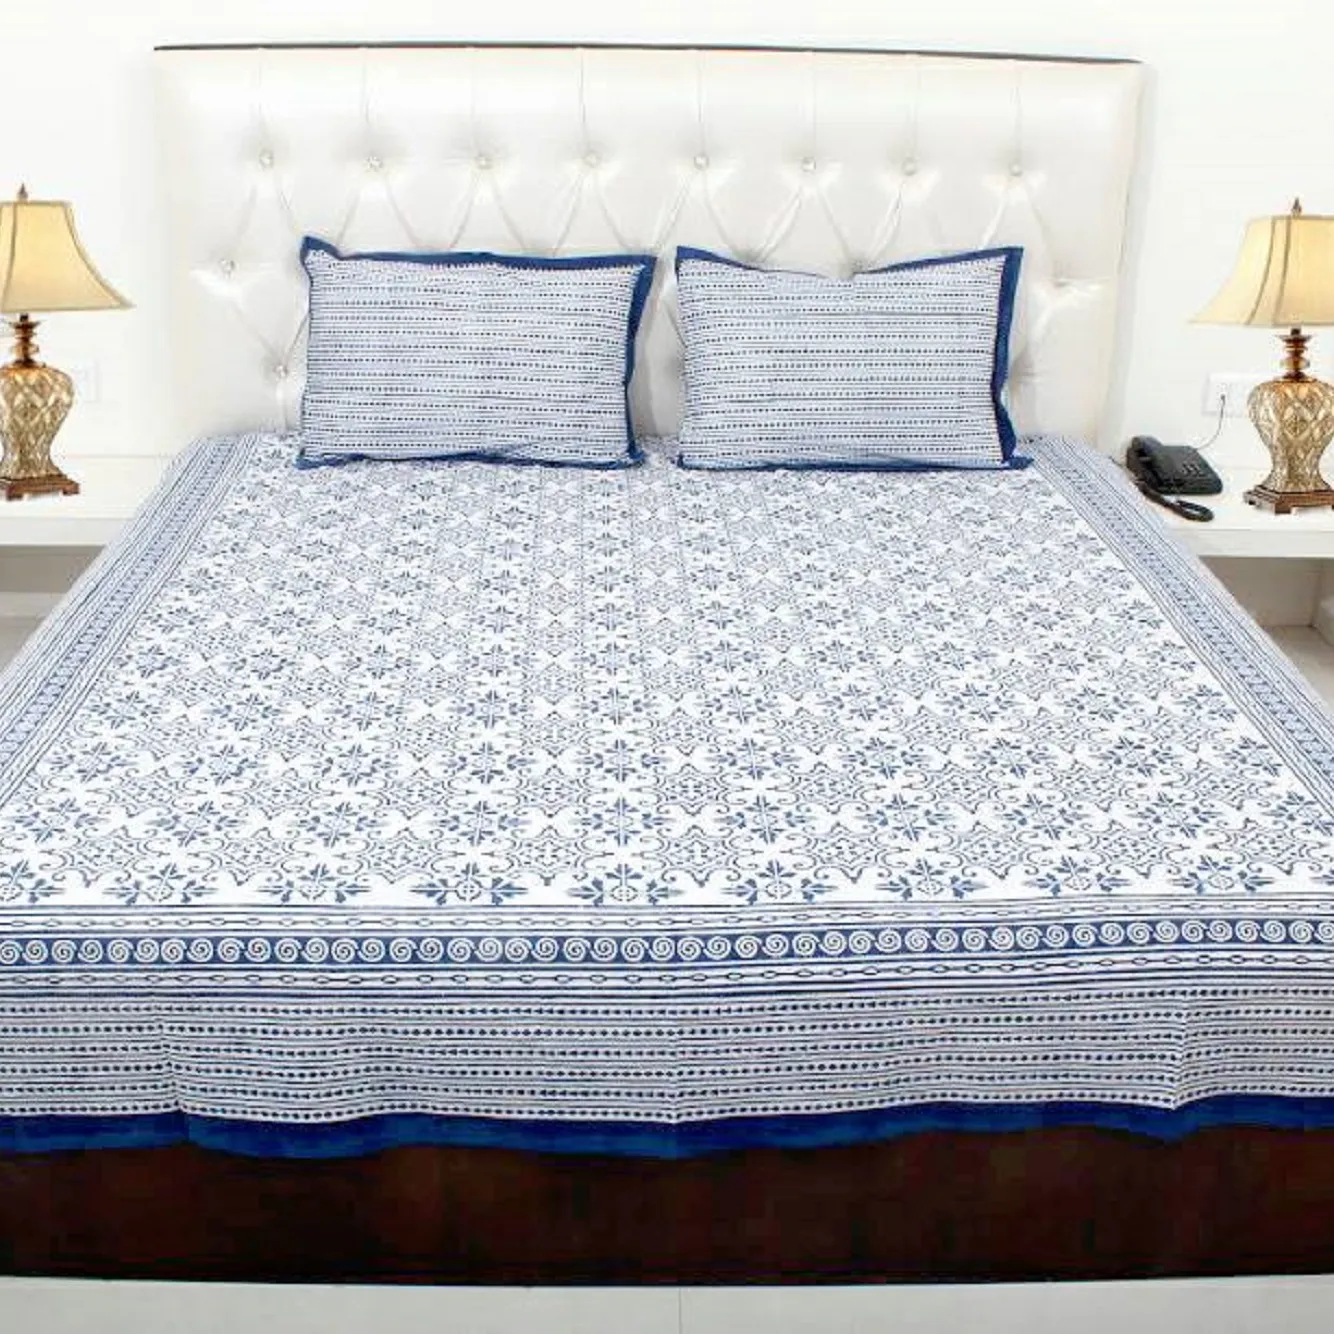 Indian Printed wooden Print Bedsheets bohemian Print Bed Spread Bed Covers Bedding Sets With Pillow Case Wholesale Affordable